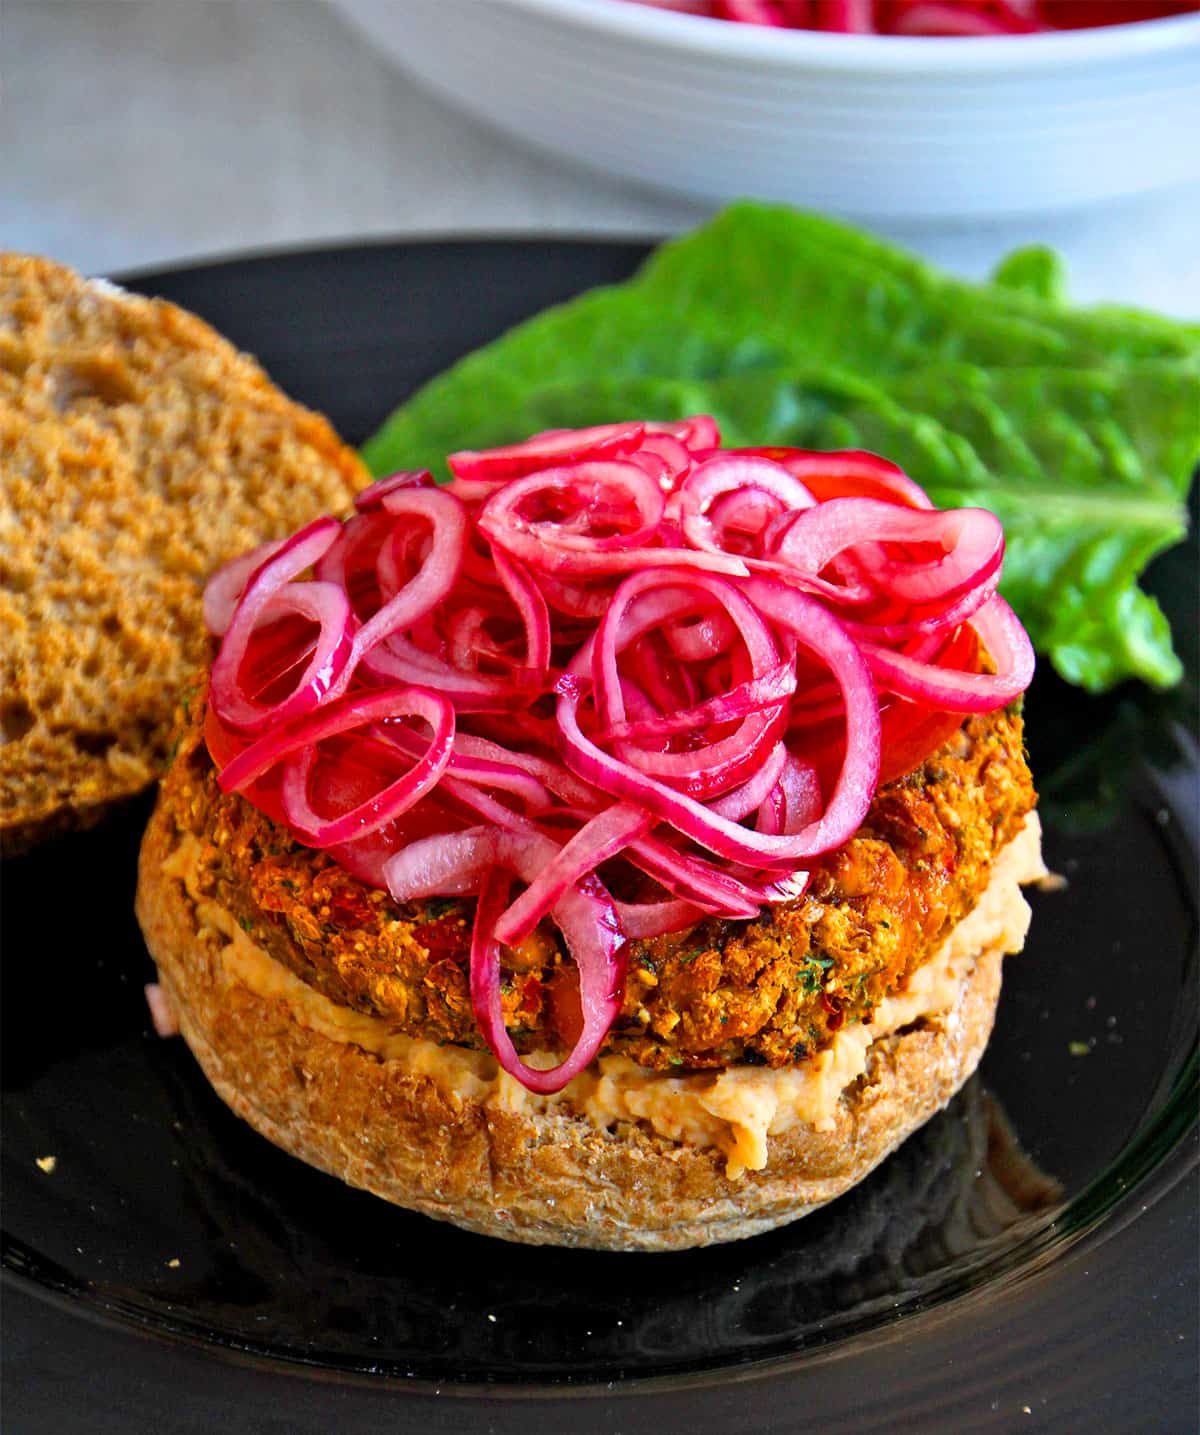 Quick pickled red onions on top of a veggie burger.